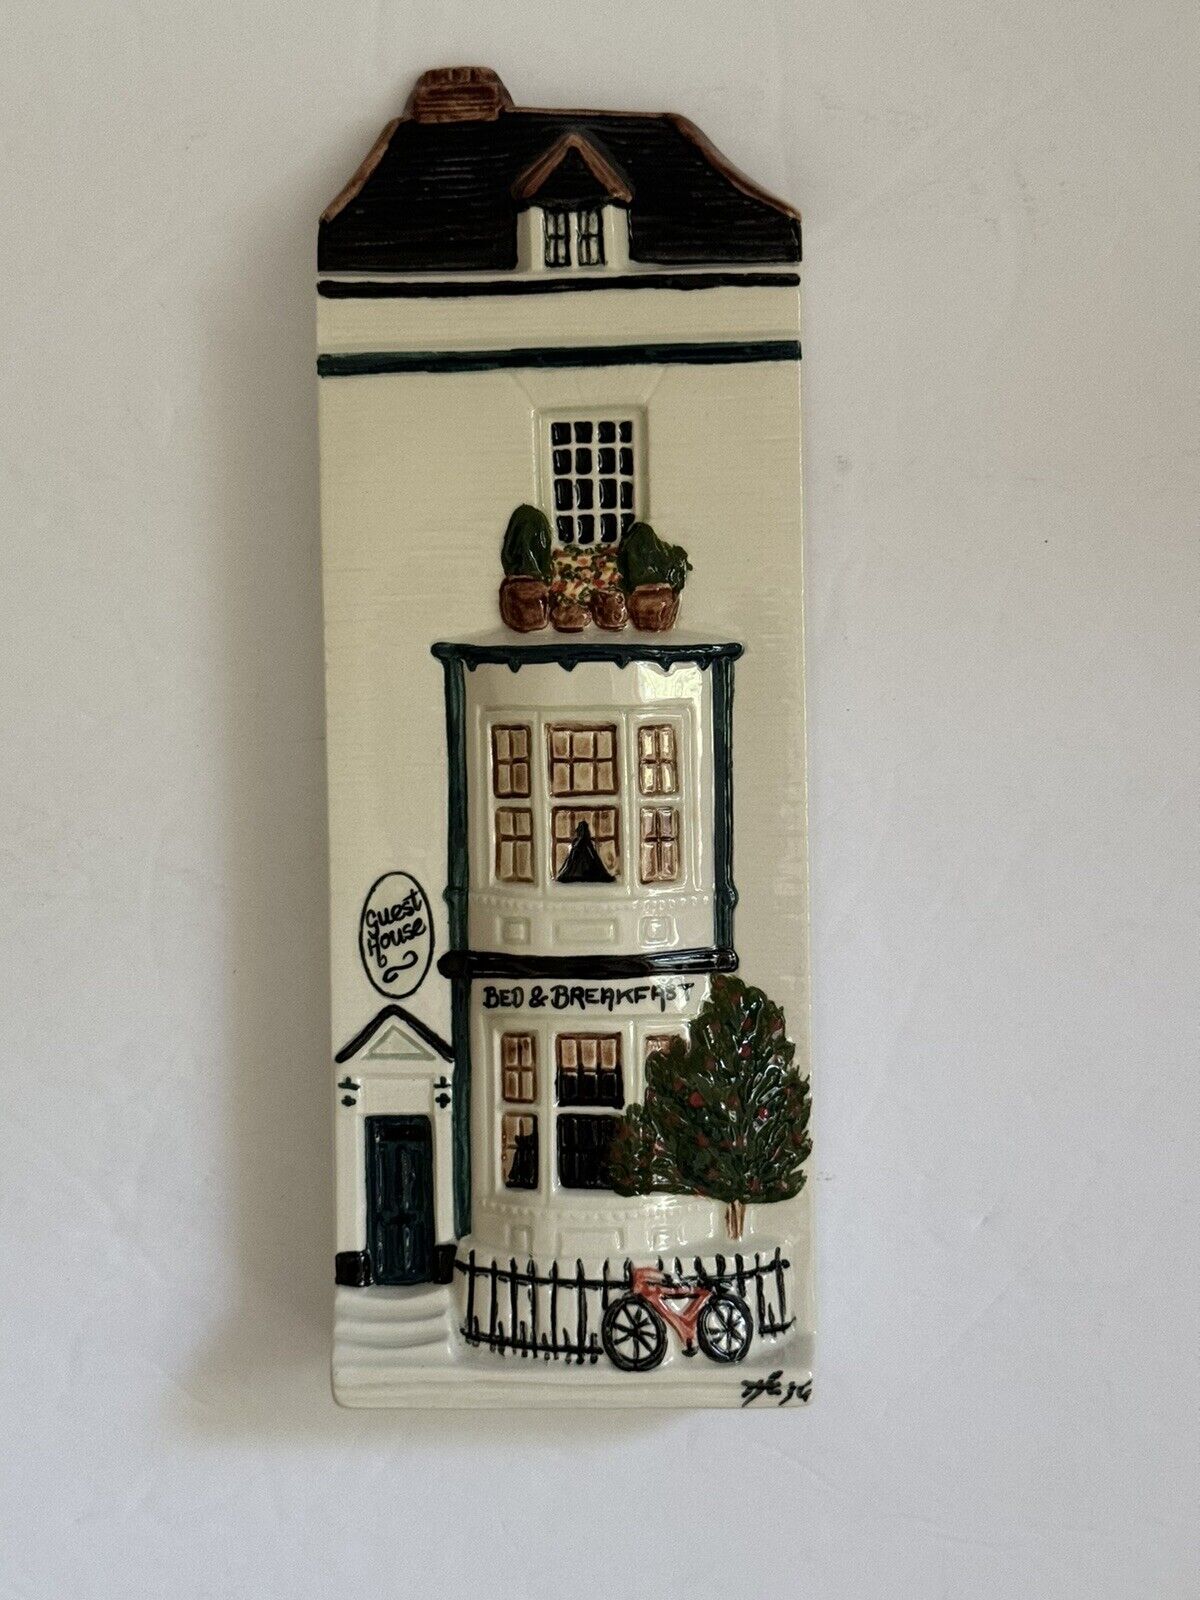 HAZLE CERAMICS - A Nation Of Shopkeepers - Guest House Bed & Breakfast